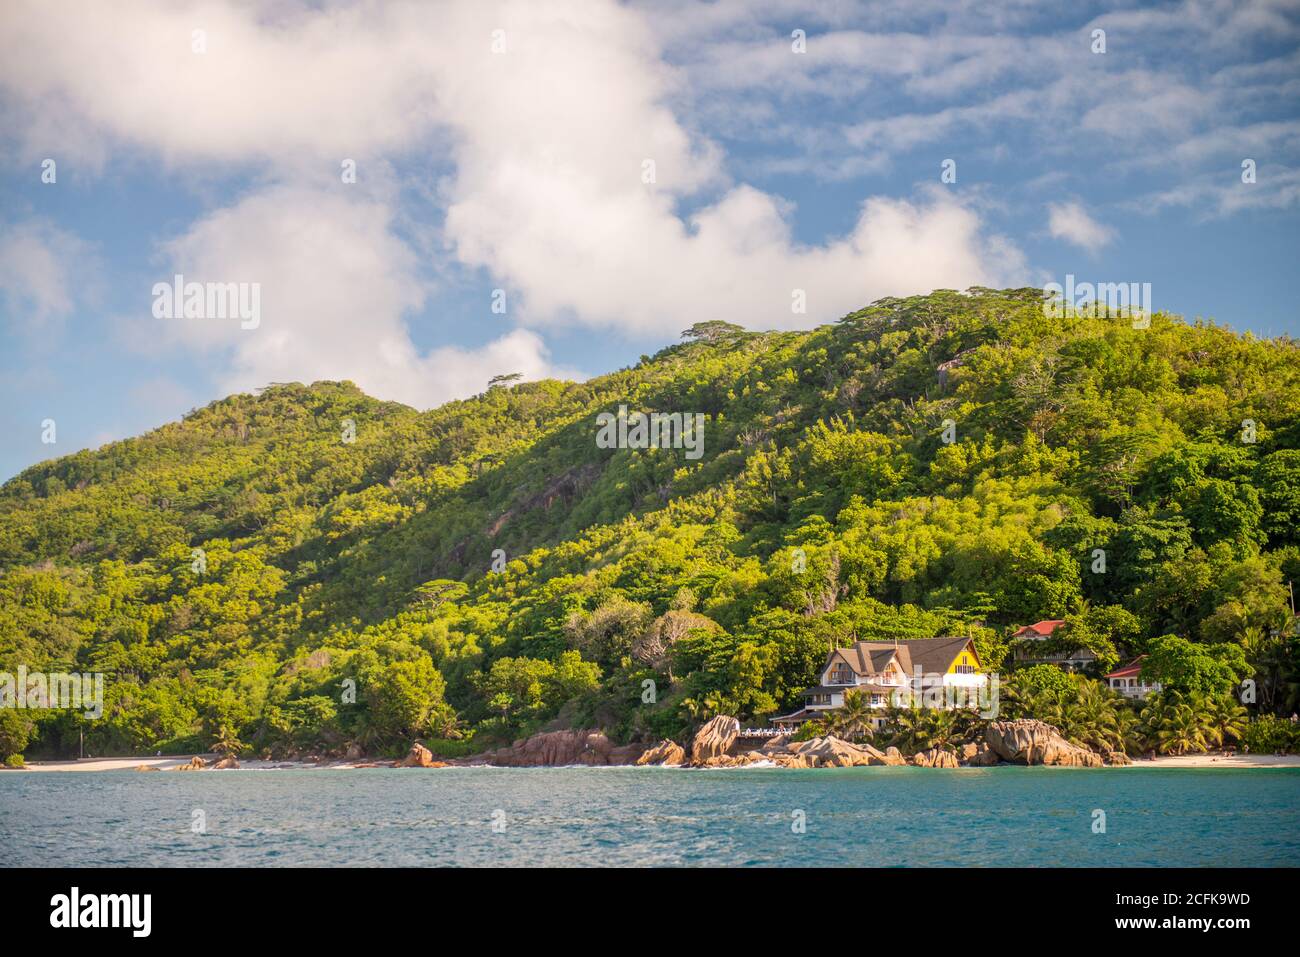 Tropical Island with palms and blue sky, Seychelles. Stock Photo